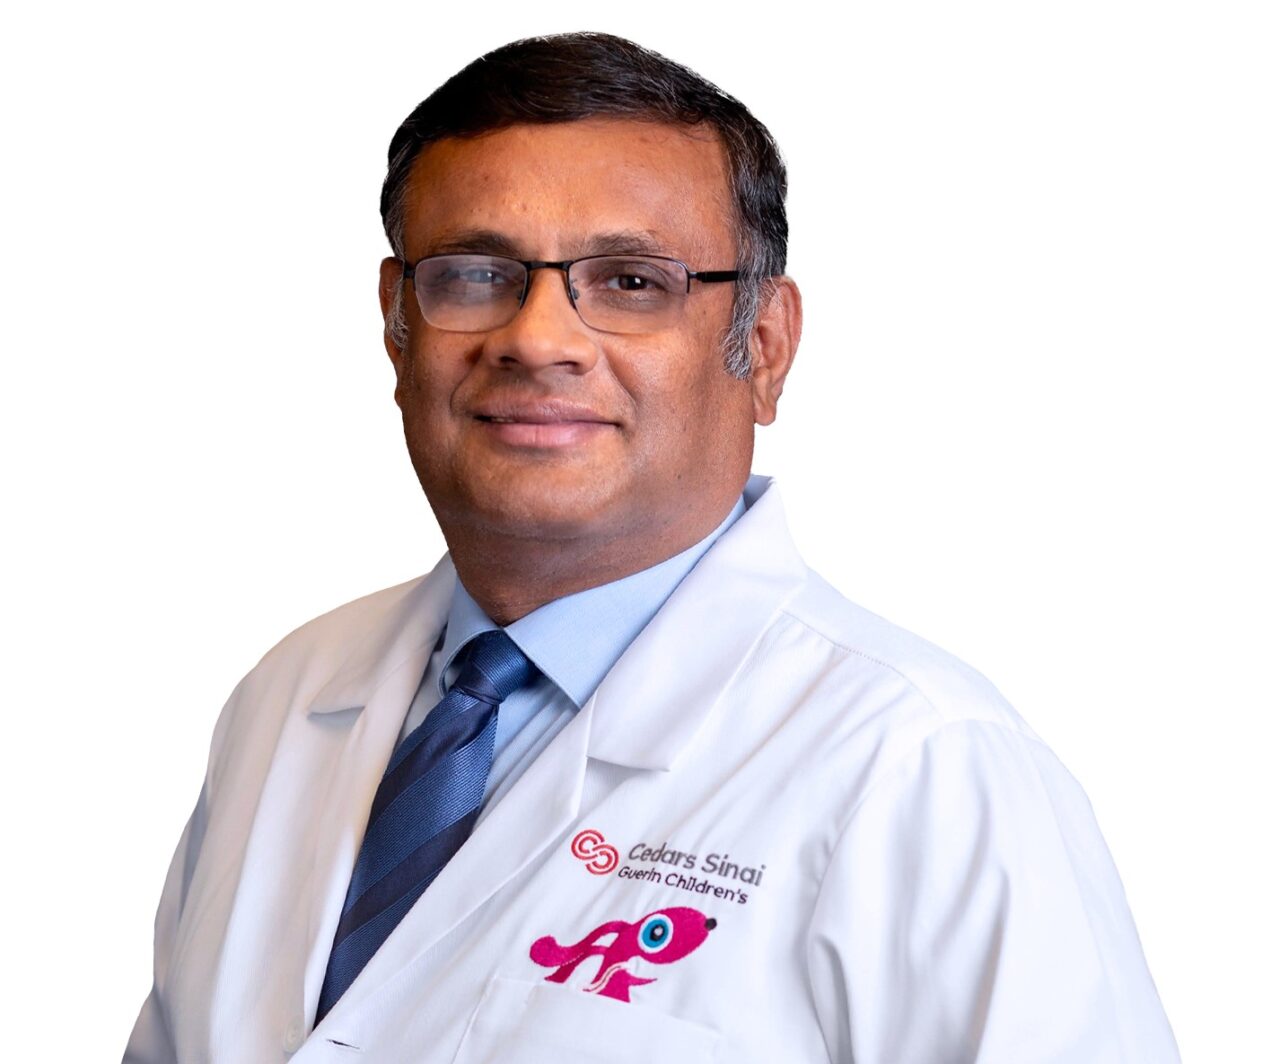 Dr. Leo Mascarenhas Takes the Helm at Cedars-Sinai as Division Chief of Pediatric Hematology/Oncology and Director of the Sarcoma Program, Catalyzing Transformation in Pediatric Cancer Care